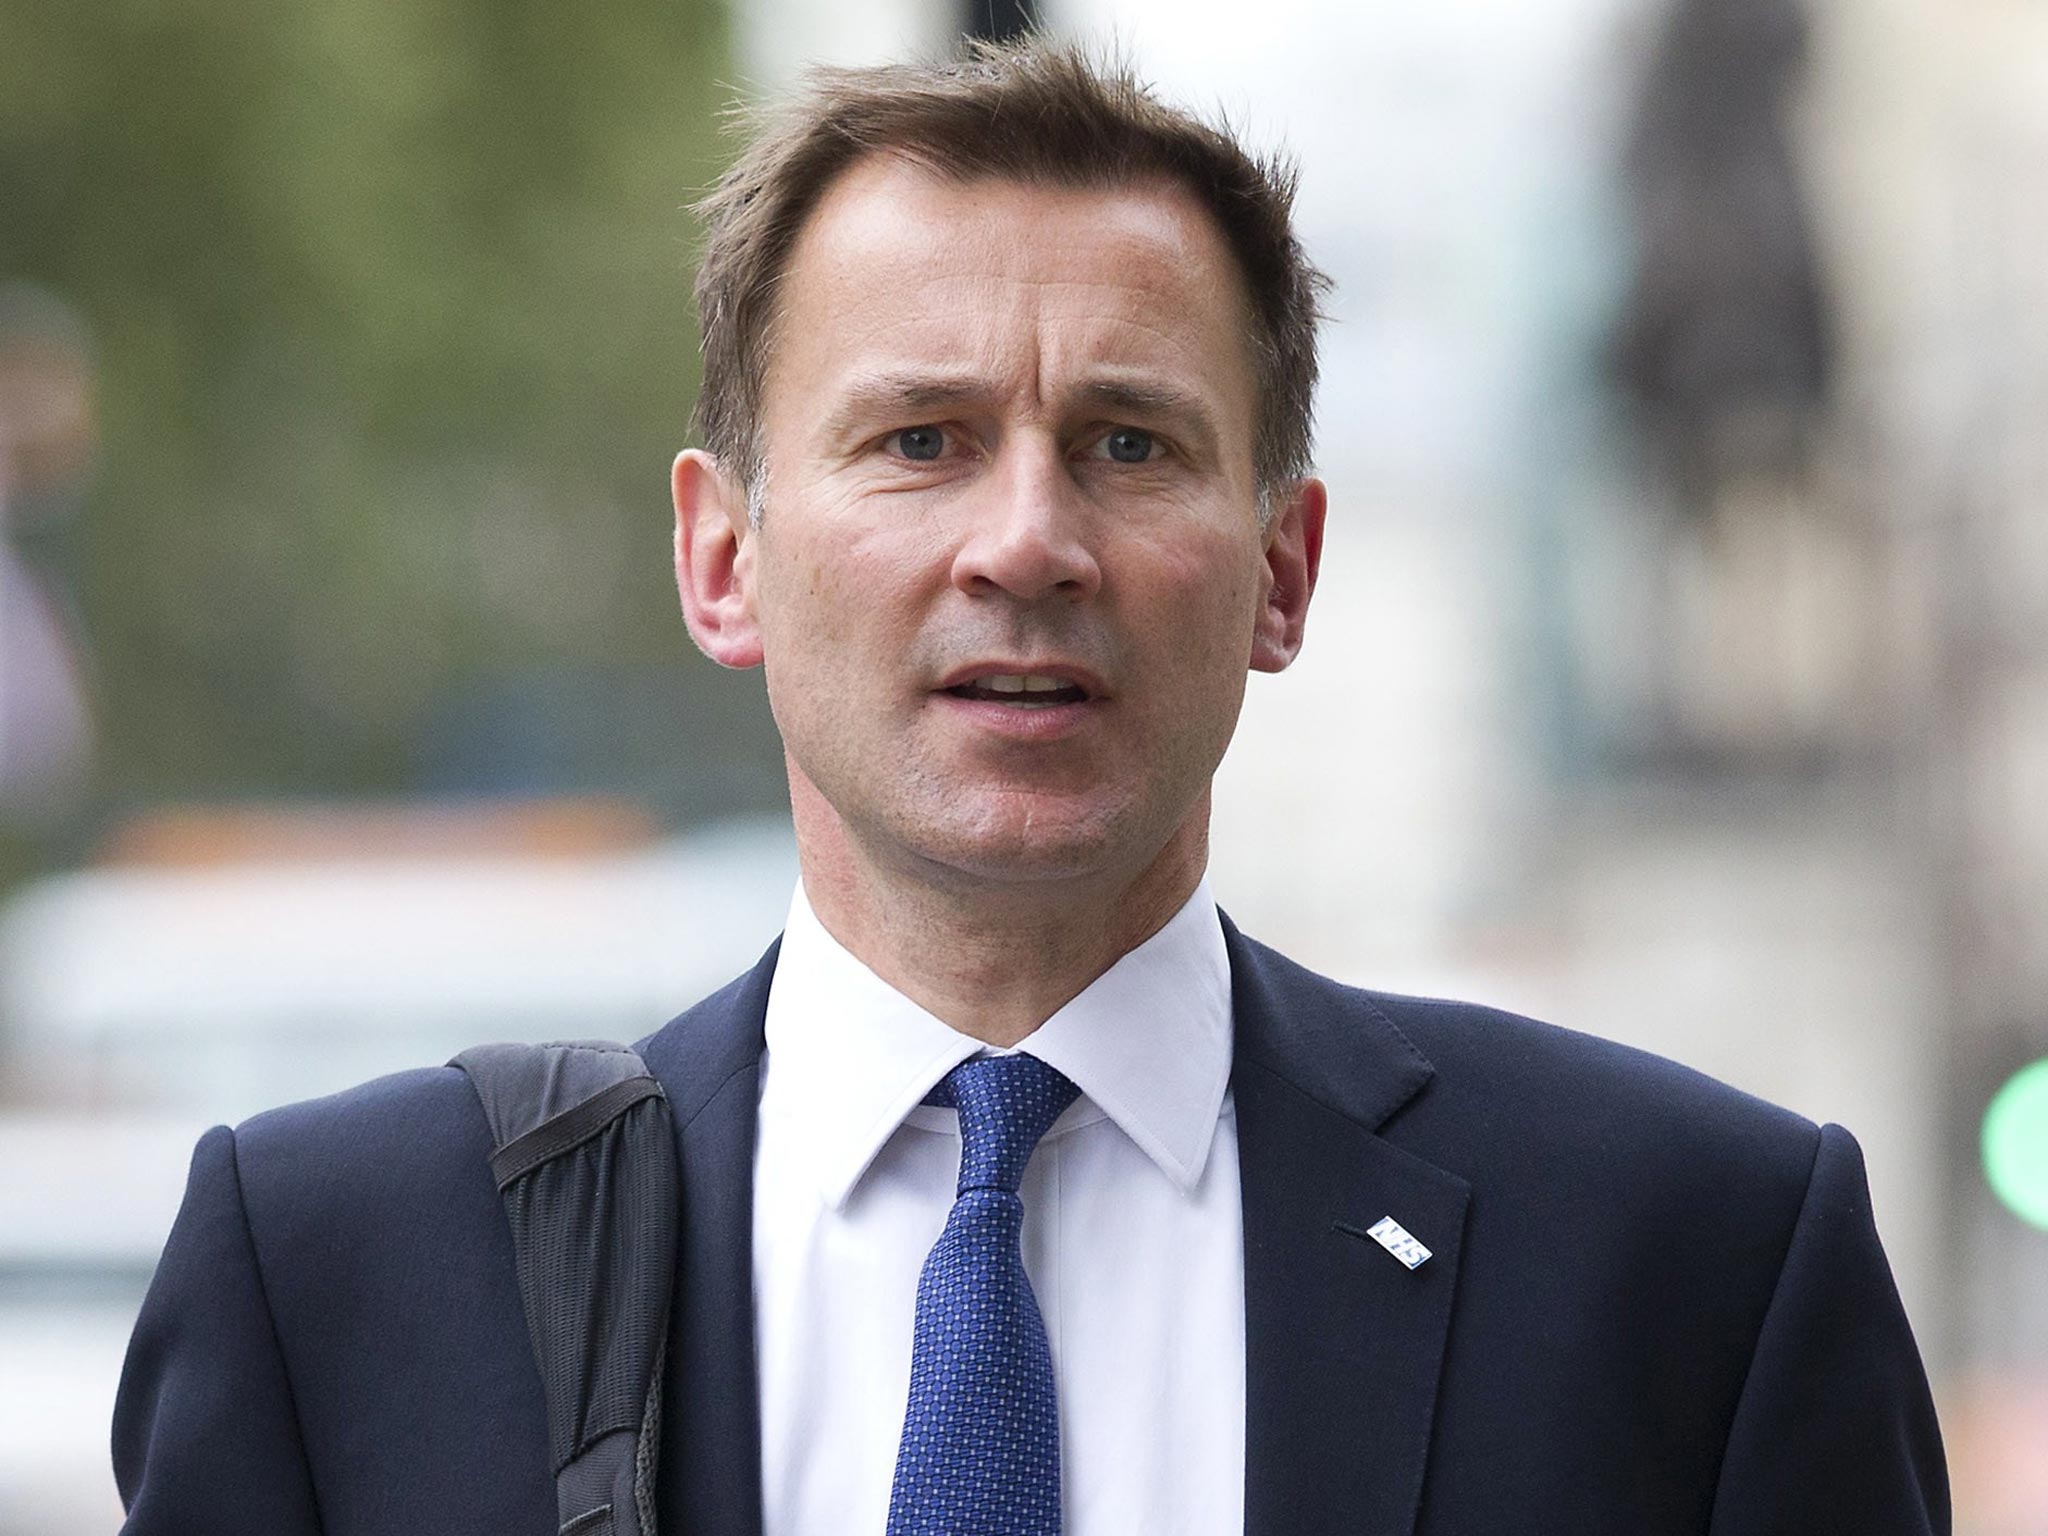 Jeremy Hunt has said that “remarkable progress” was being made in reducing smoking rates